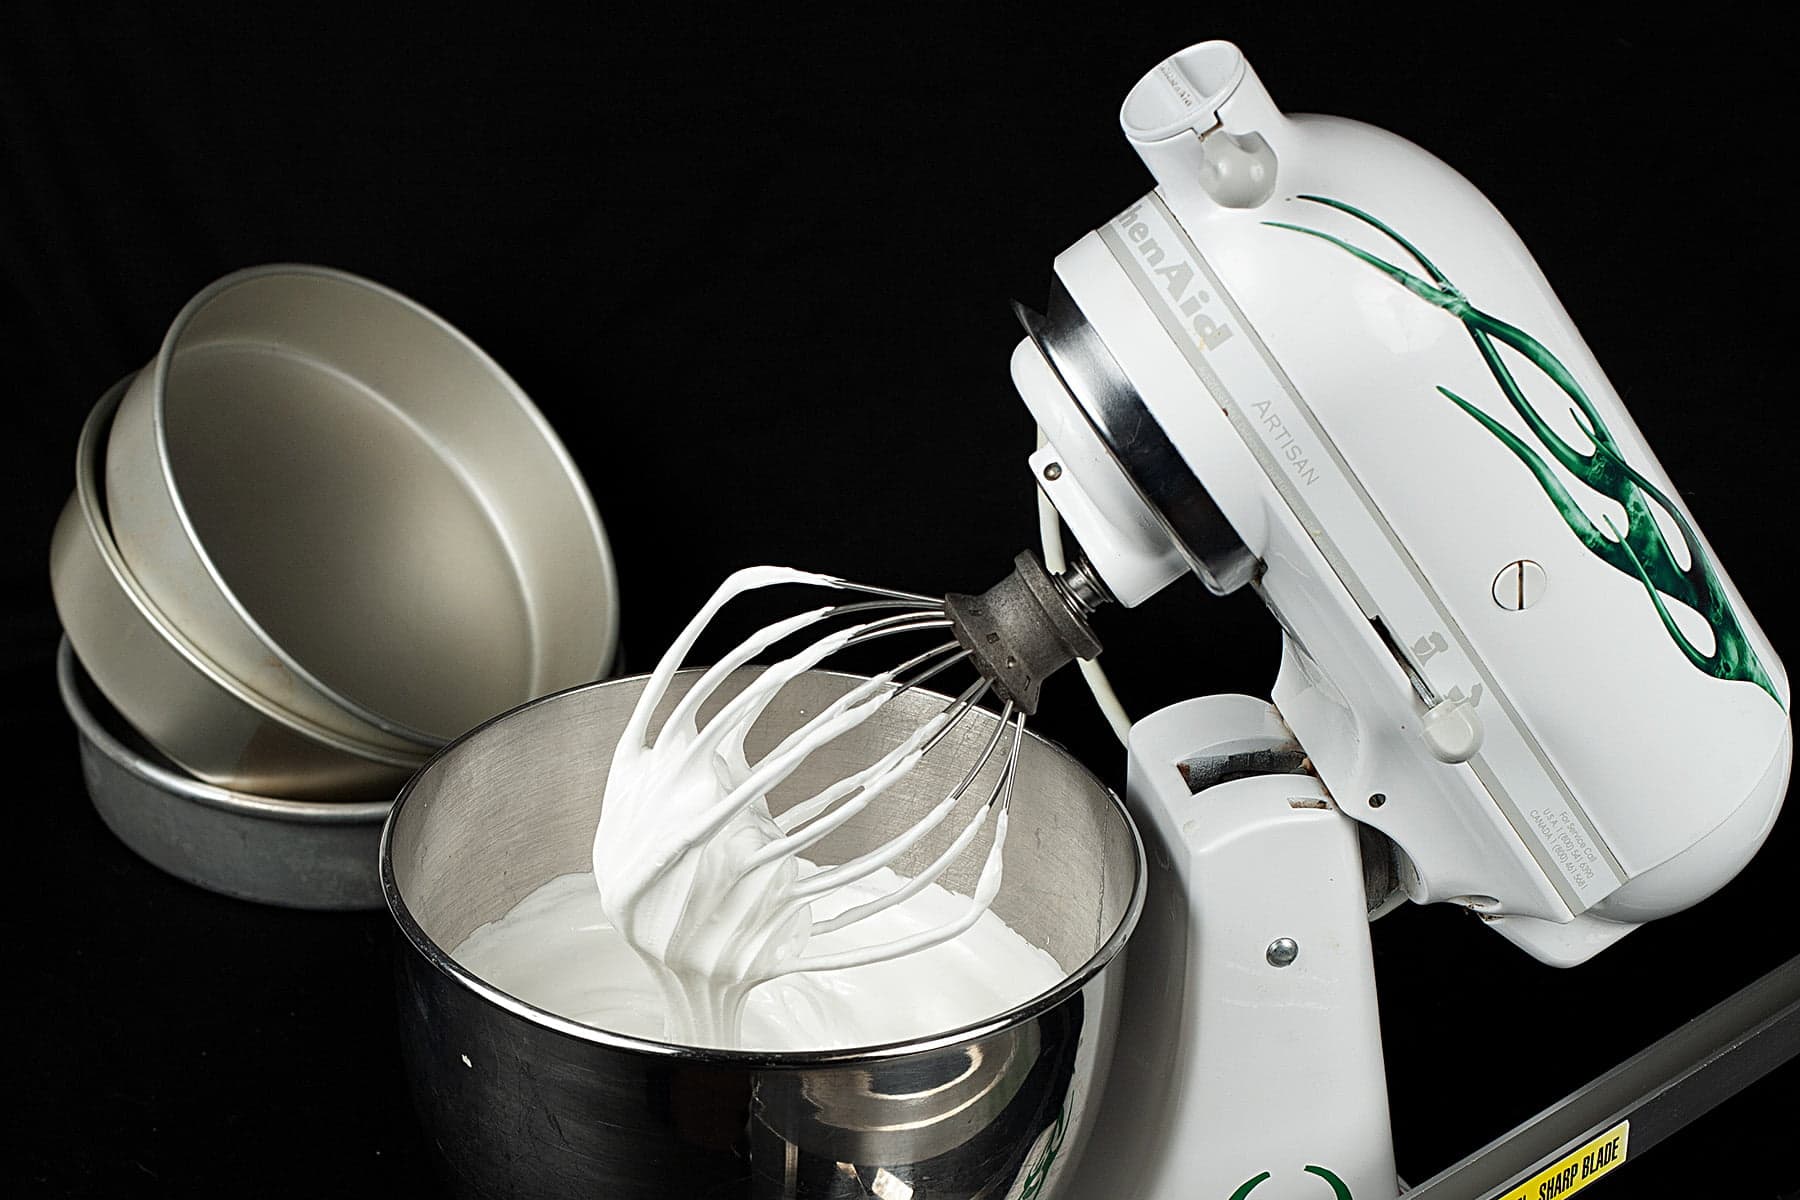 A white stand mixer is pictured against a black background. It's tilted up, showing the meringue in the bowl and on the whisk attachment.